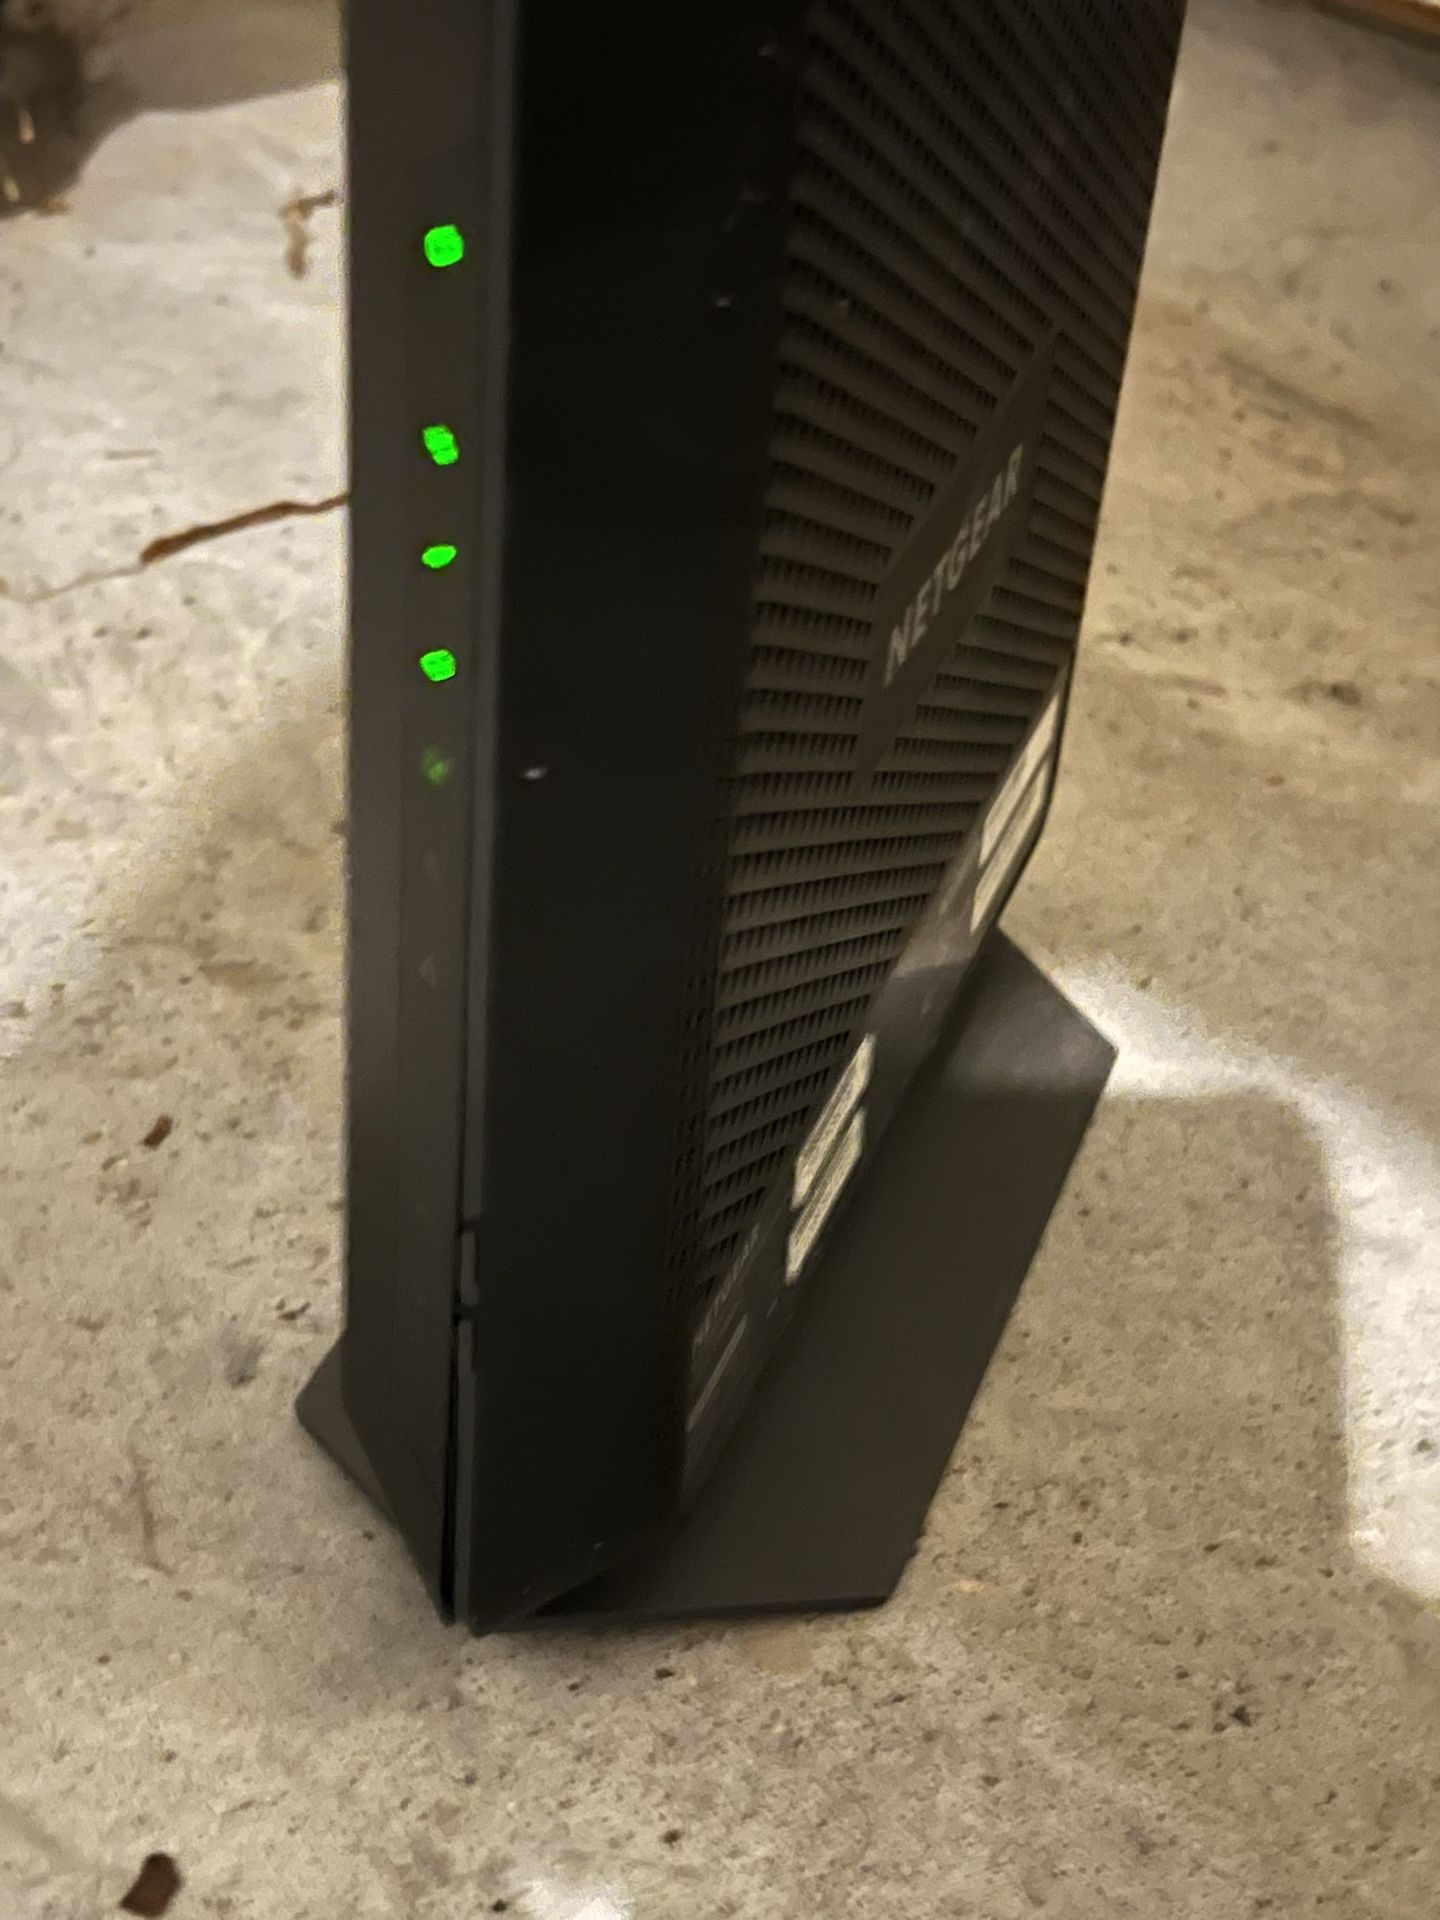 Modem And Router All In One 